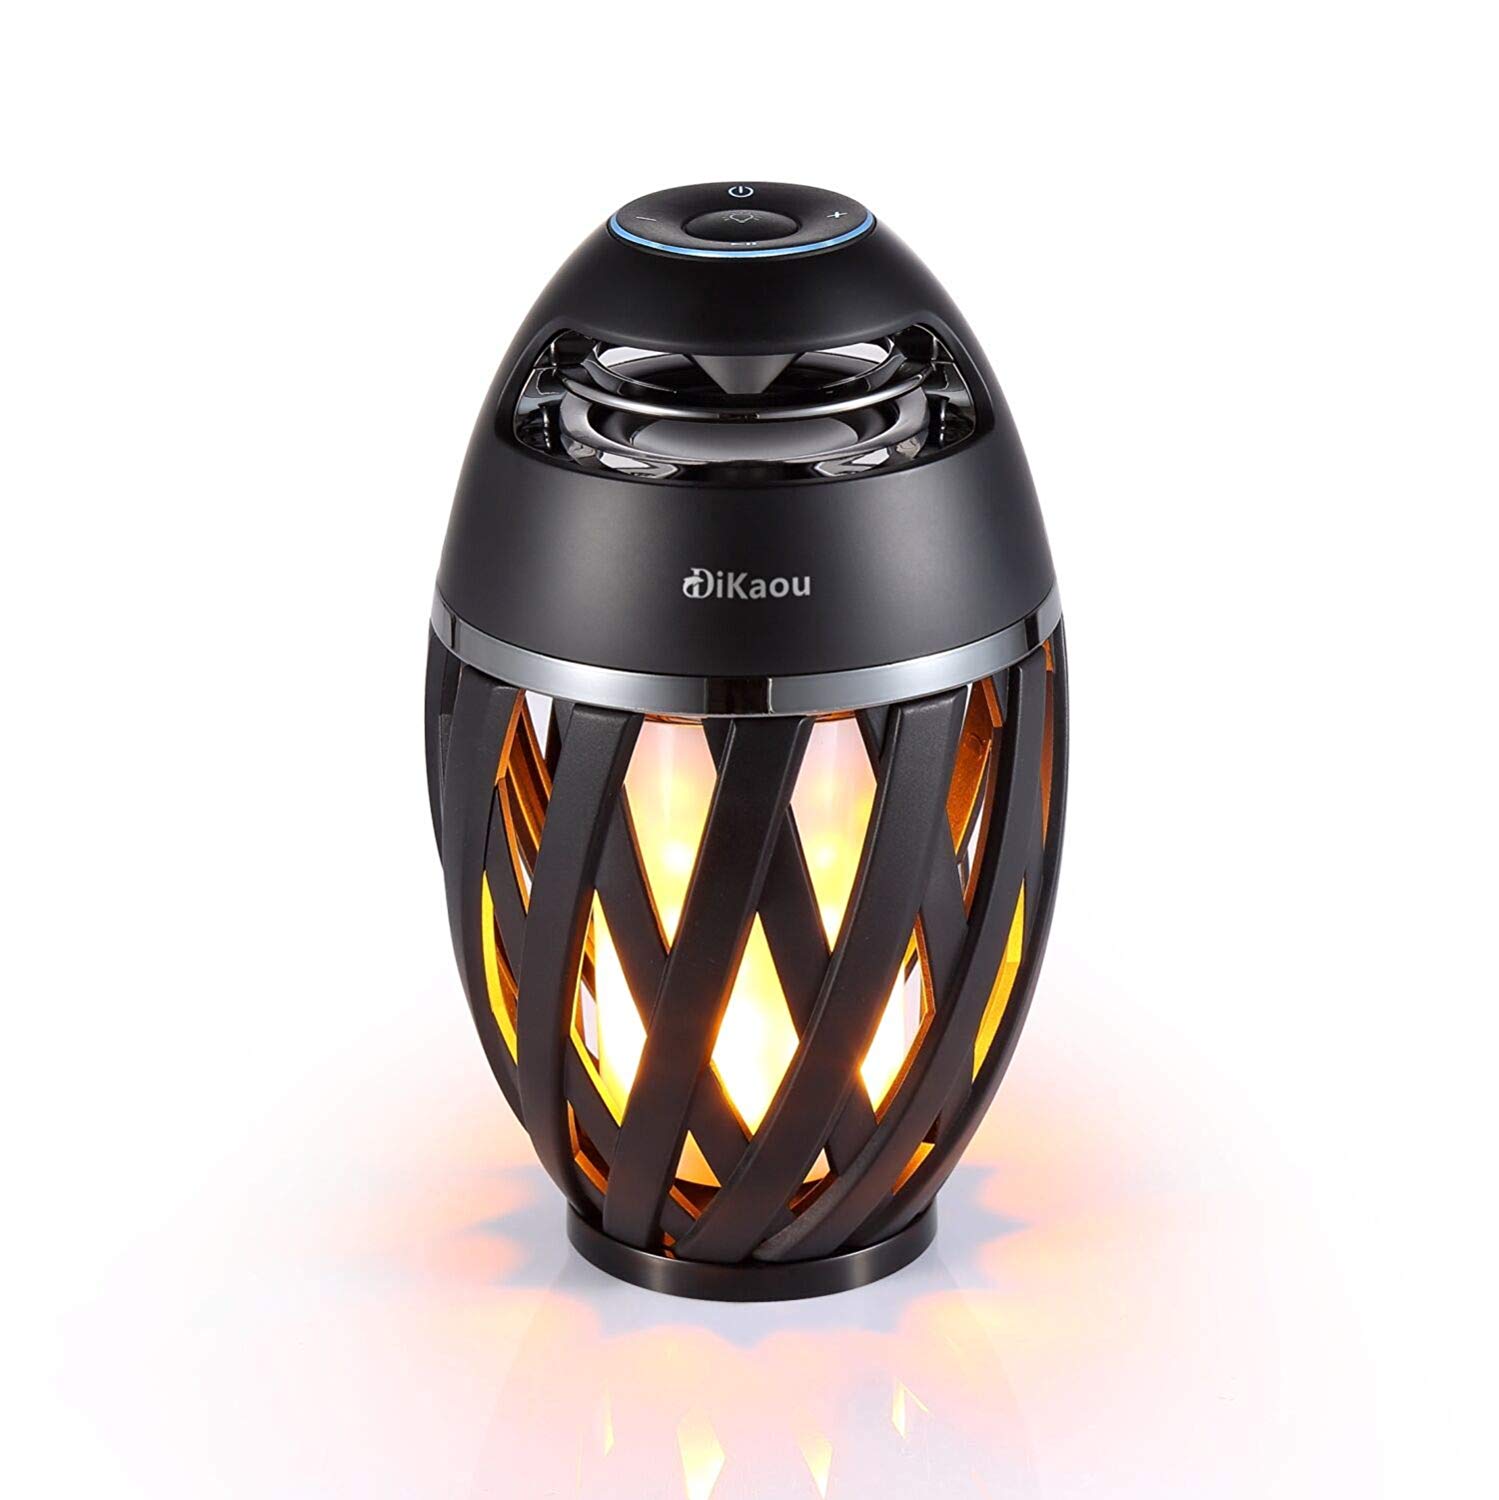 DIKAOU Led flame table lamp, Torch atmosphere Bluetooth speakers&Outdoor Portable Stereo Speaker with HD Audio and Enhanced Bass, LED flickers warm yellow lights BT4.2 for iPhone/iPad /Android